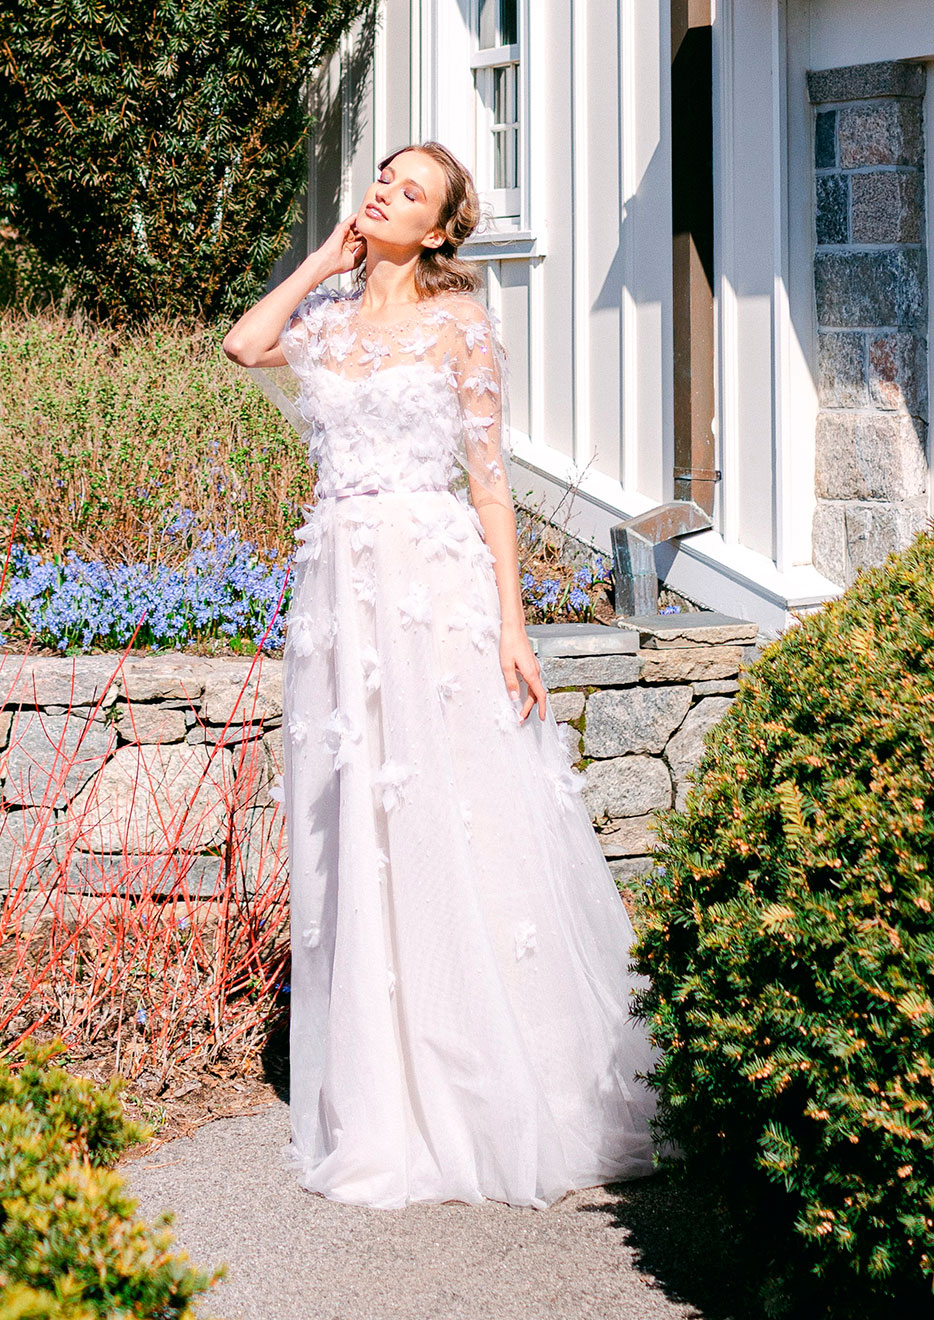 Wedding dress model Bliss- Wedding dress style strapless with a line gown with 3D hand embroidered flowers - Verdin New York